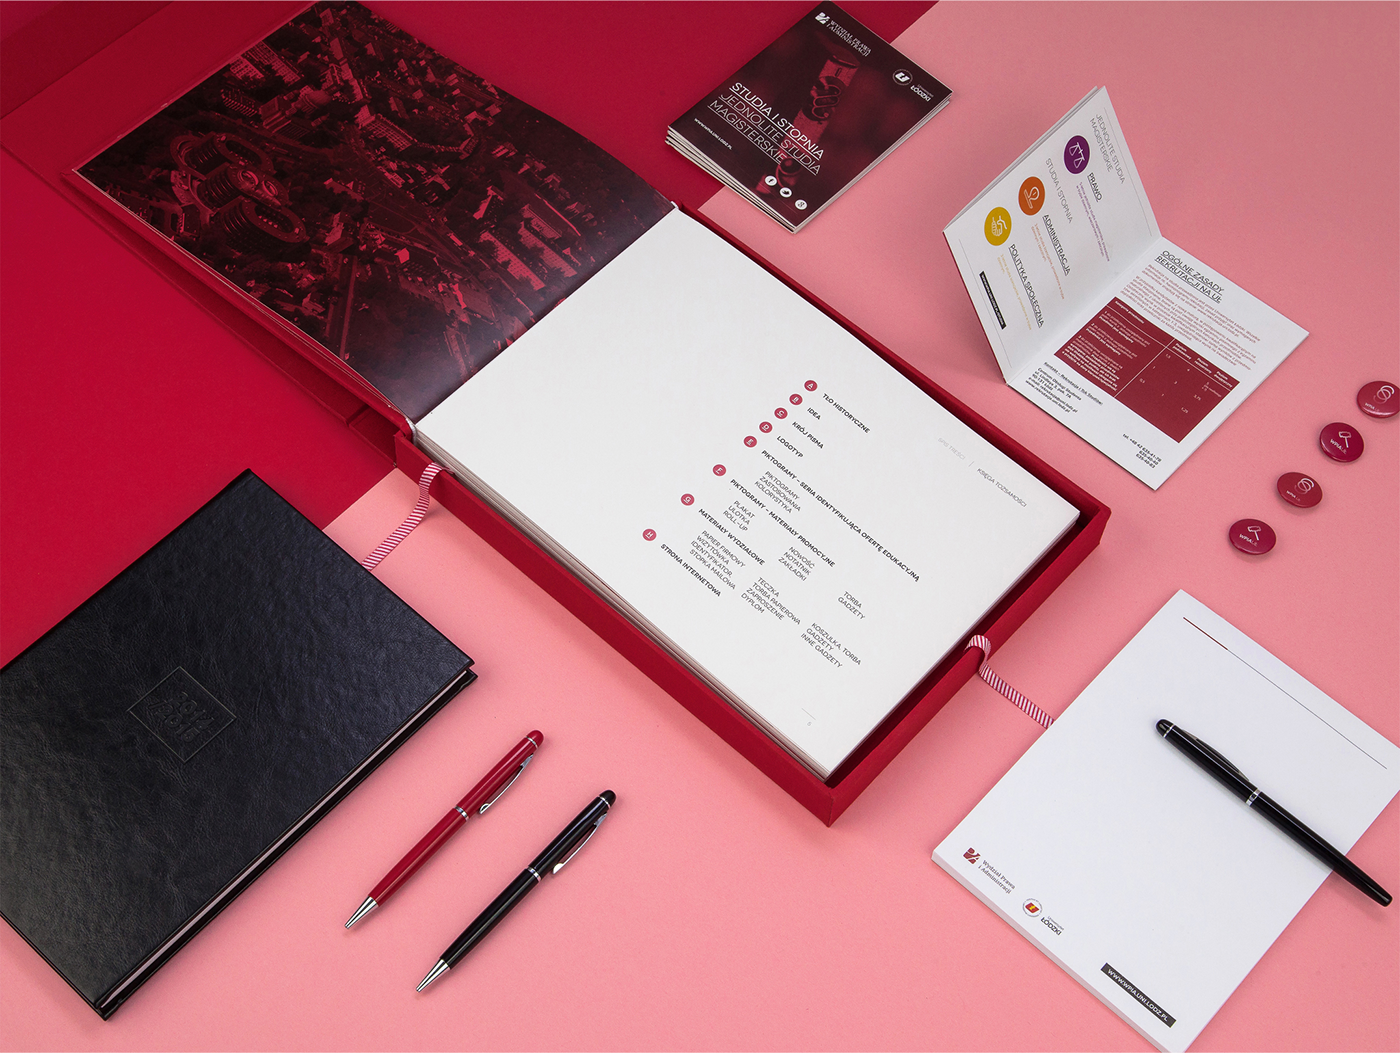 brand book visual visual identity corporate Corporate Identity business Stationery University lodz faculty school law administration brand